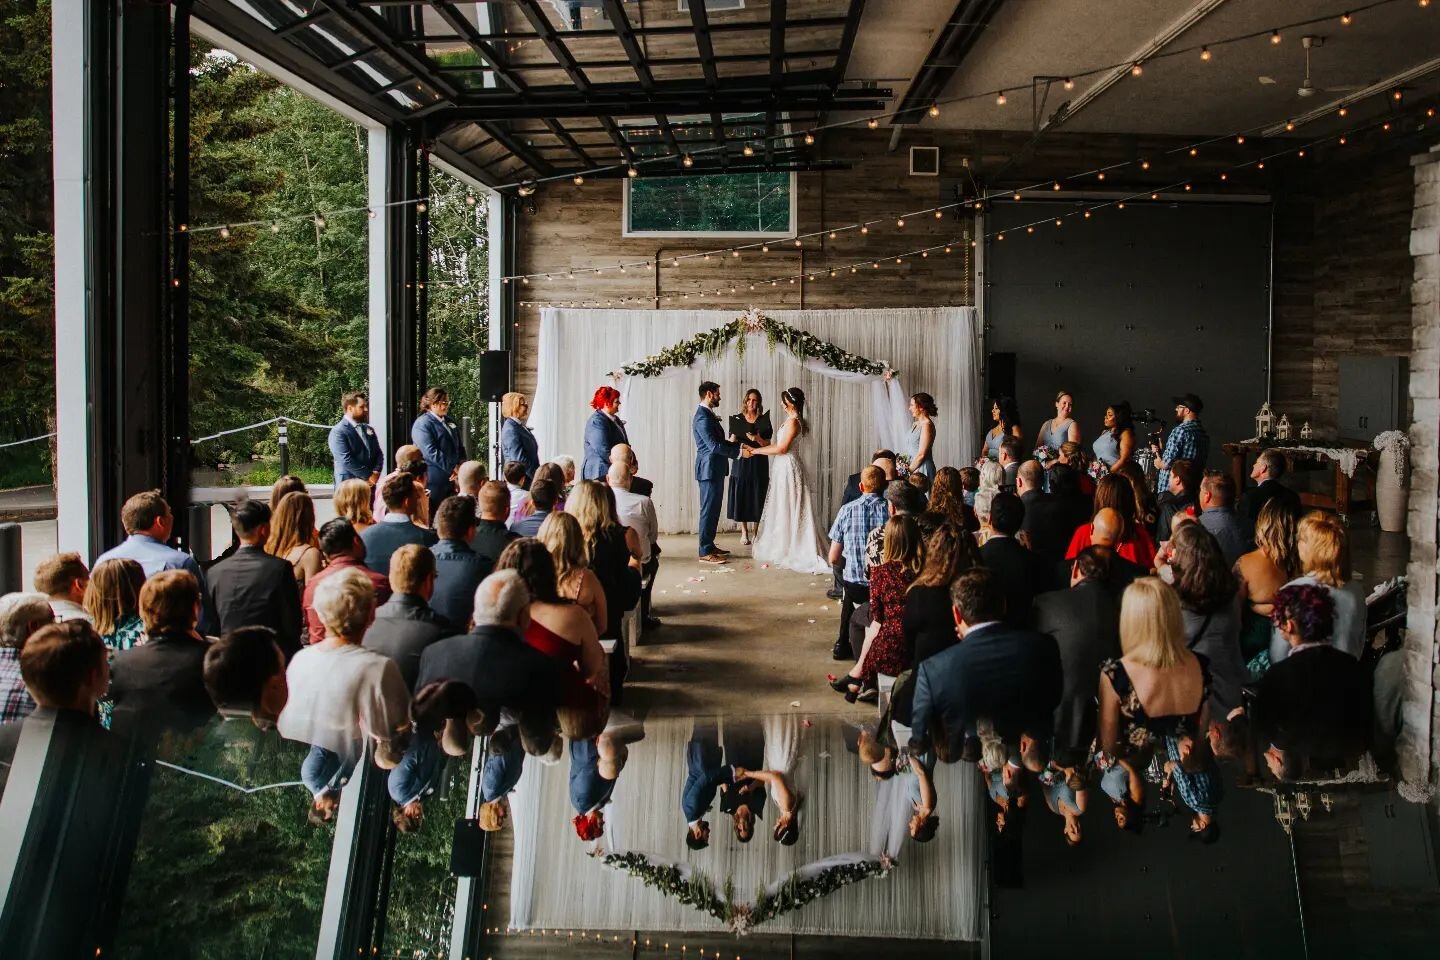 When your backup rain location is this gorgeous 🤯 🤯🤯 Steve &amp; Lindsay sealed the deal then celebrated with loved ones at their cabin into the wee hours I'm sure 😉  Loved getting to know these two!